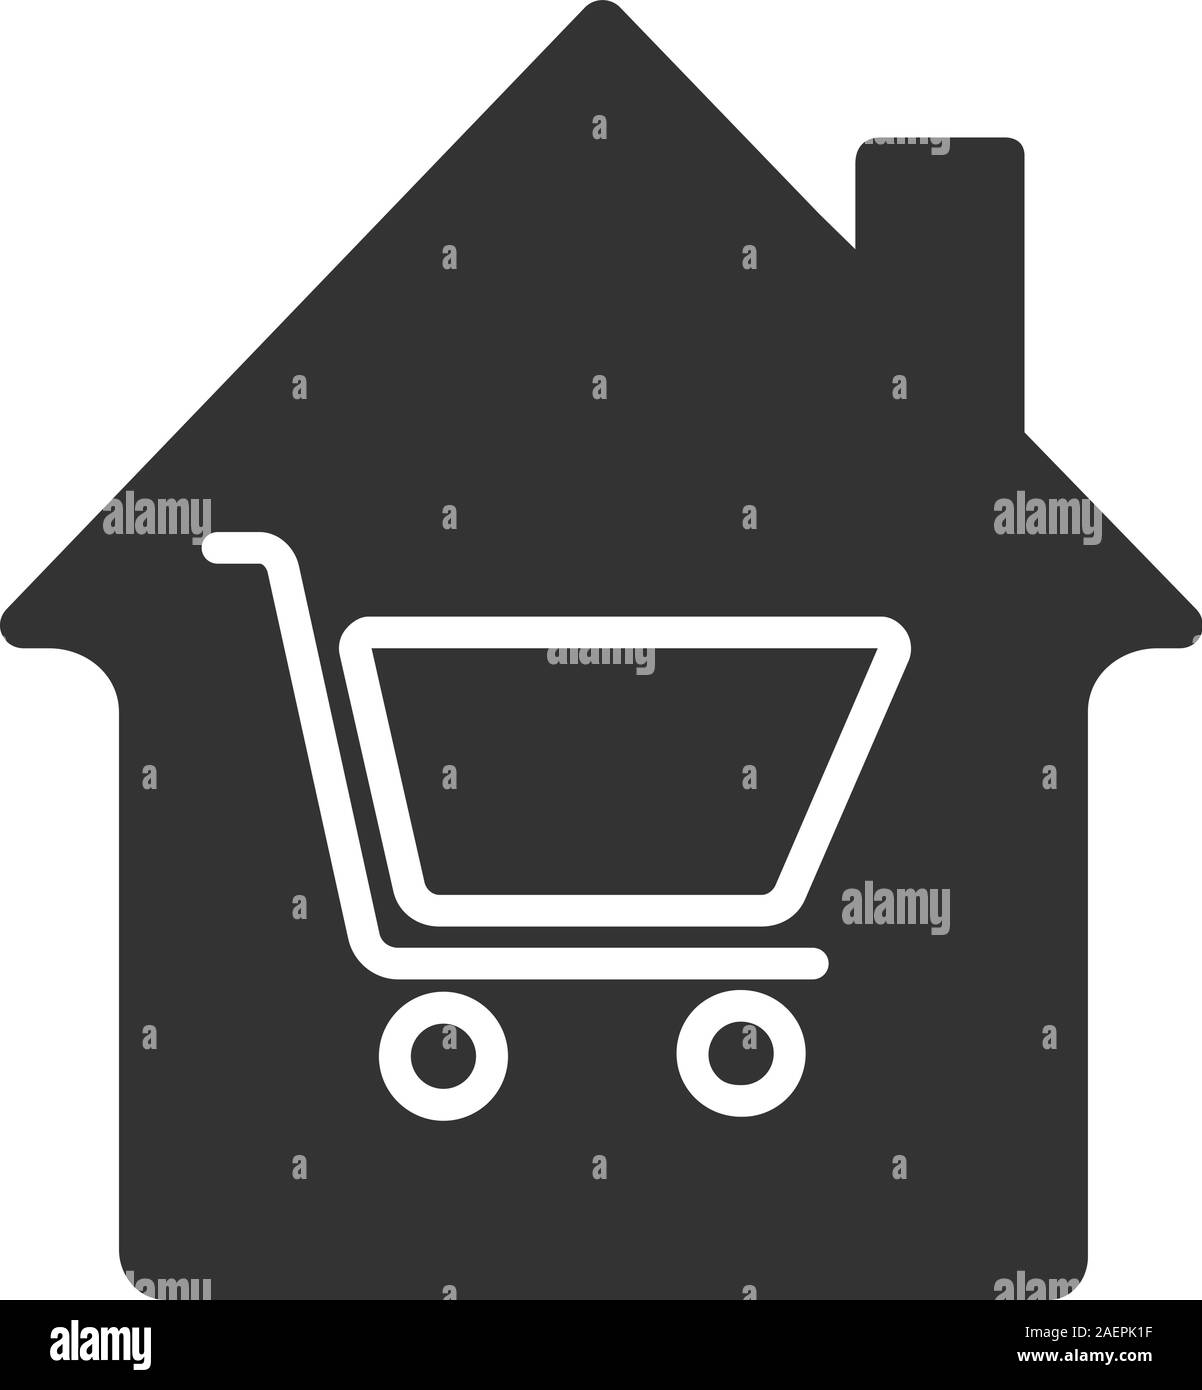 Household items Cut Out Stock Images & Pictures - Alamy